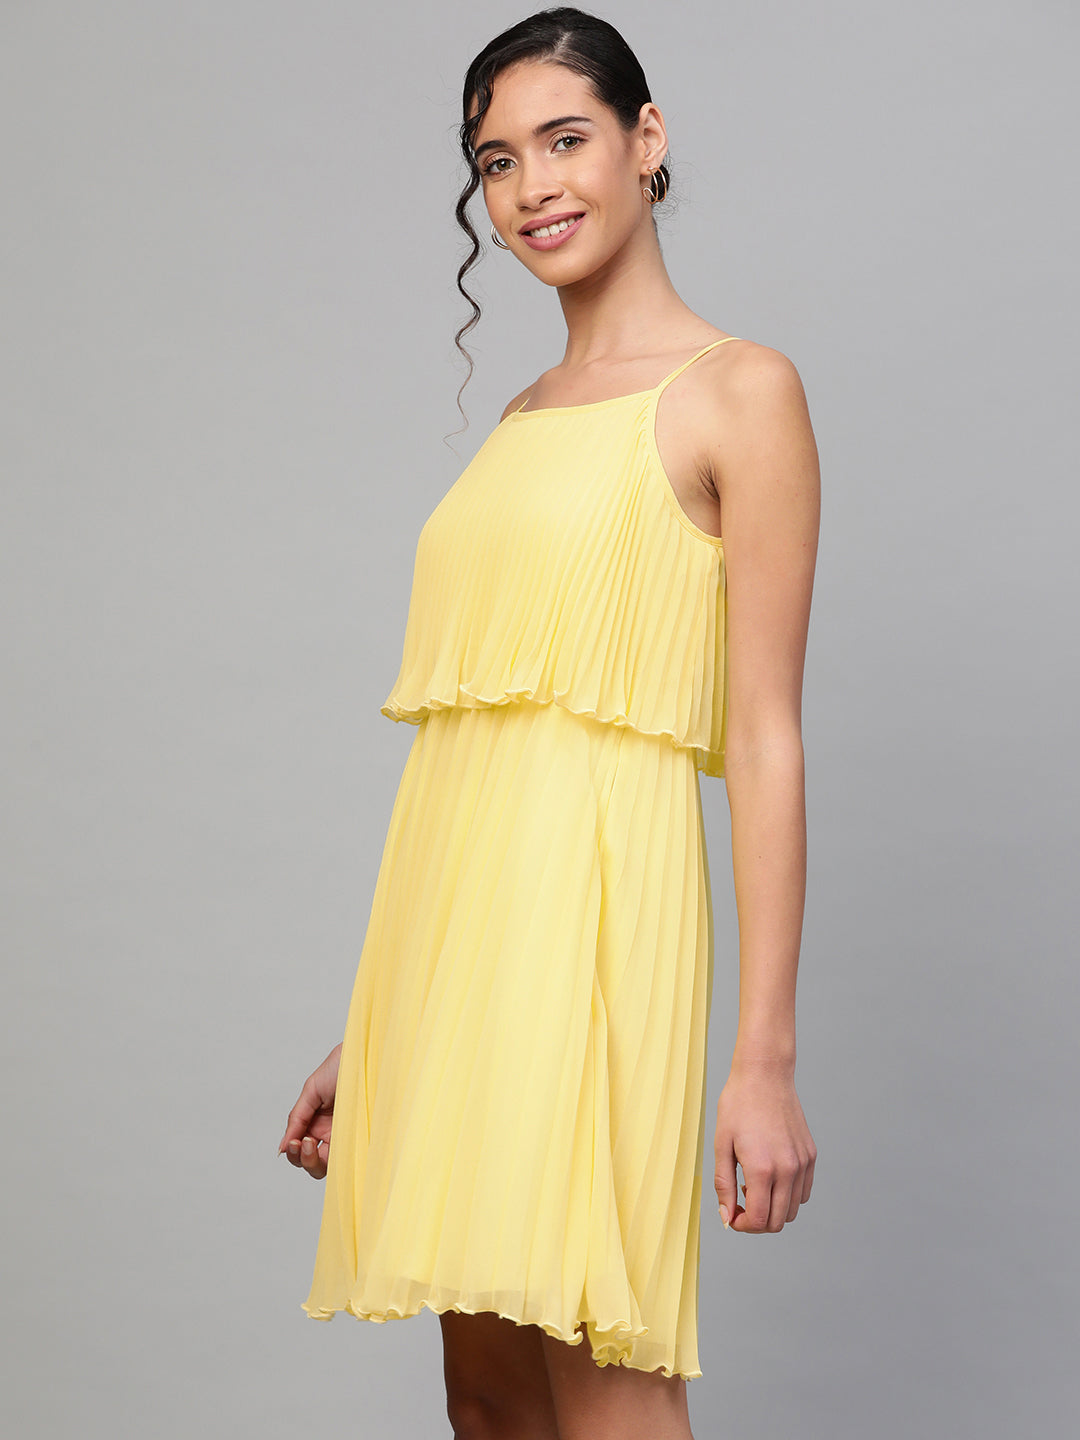 Buy Yellow Flared Panelled Dress Online - Shop for W